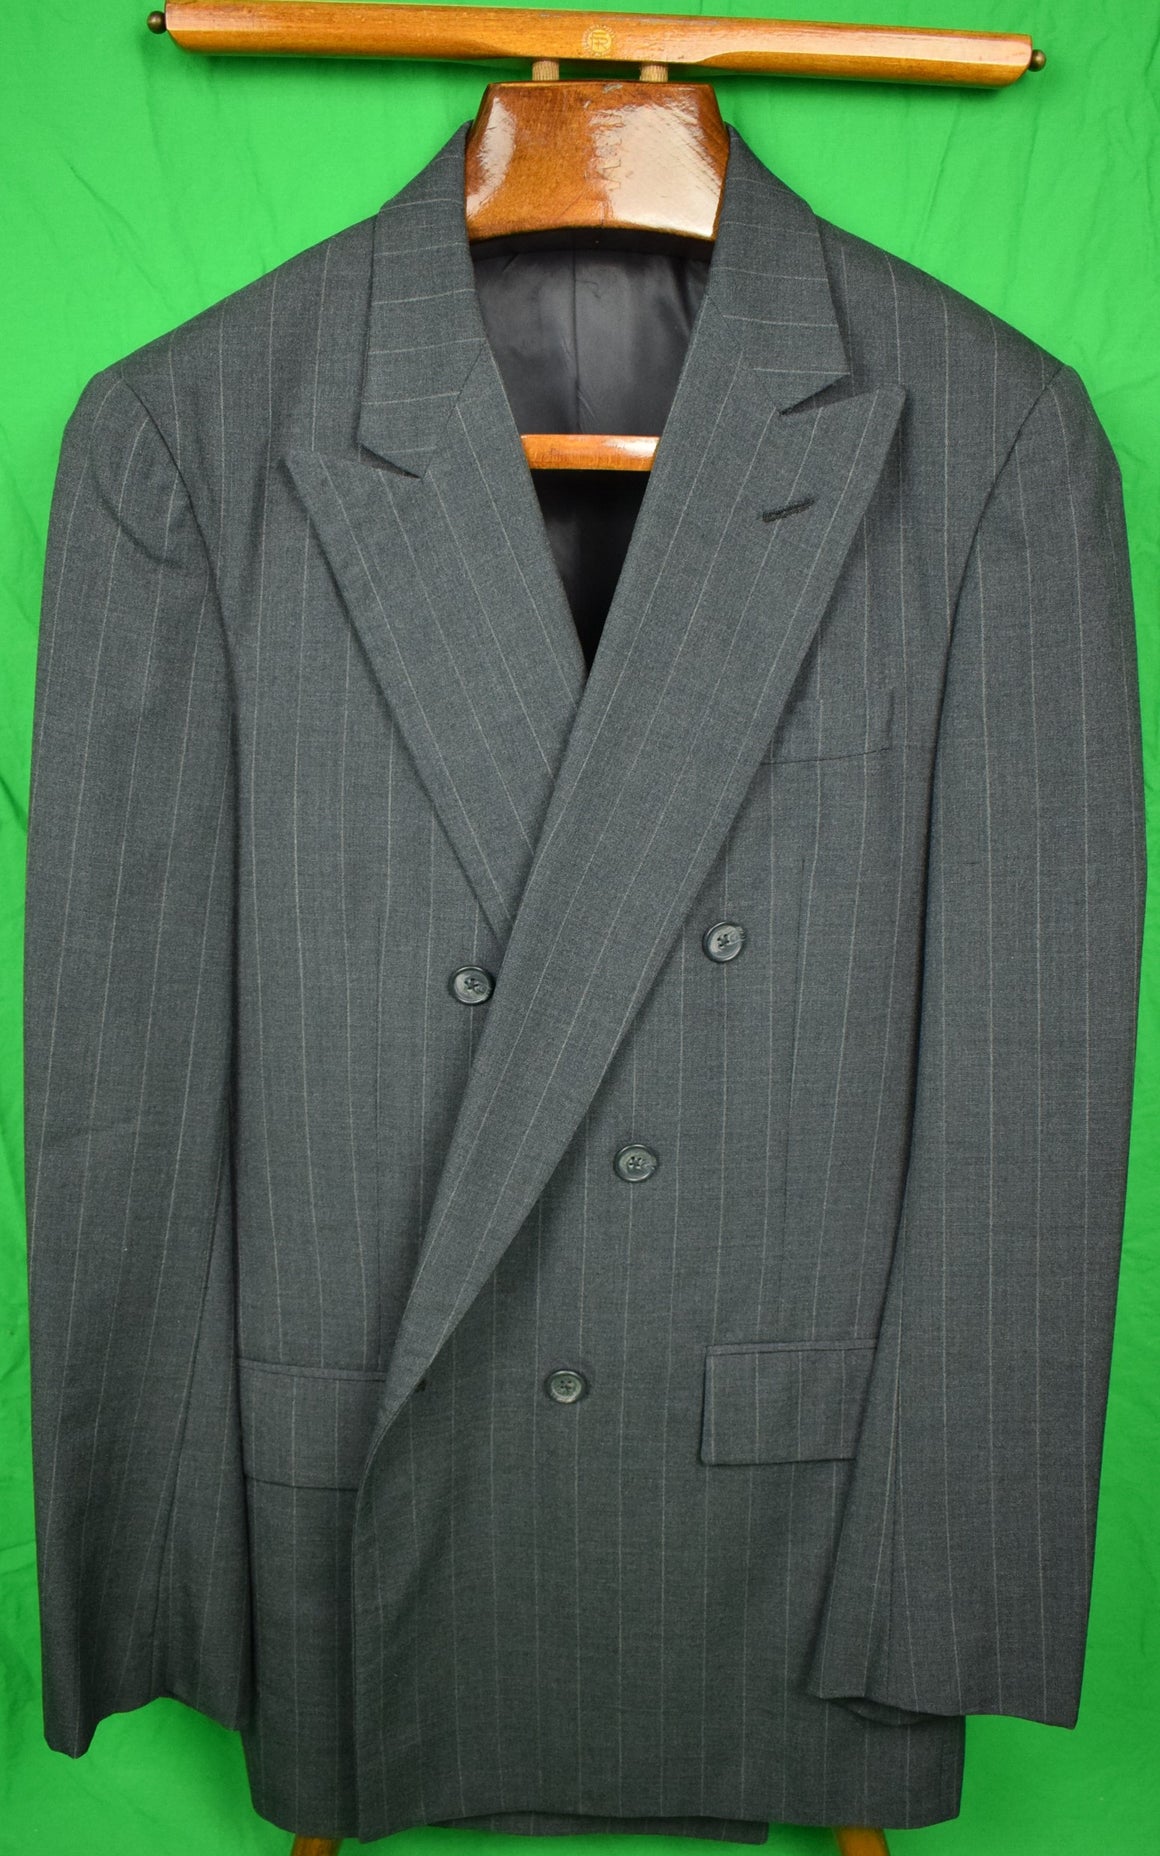 "The Andover Shop Med-Grey Trop Worsted Chalk Stripe (3x1) DB Suit" Sz 40L x 33"W